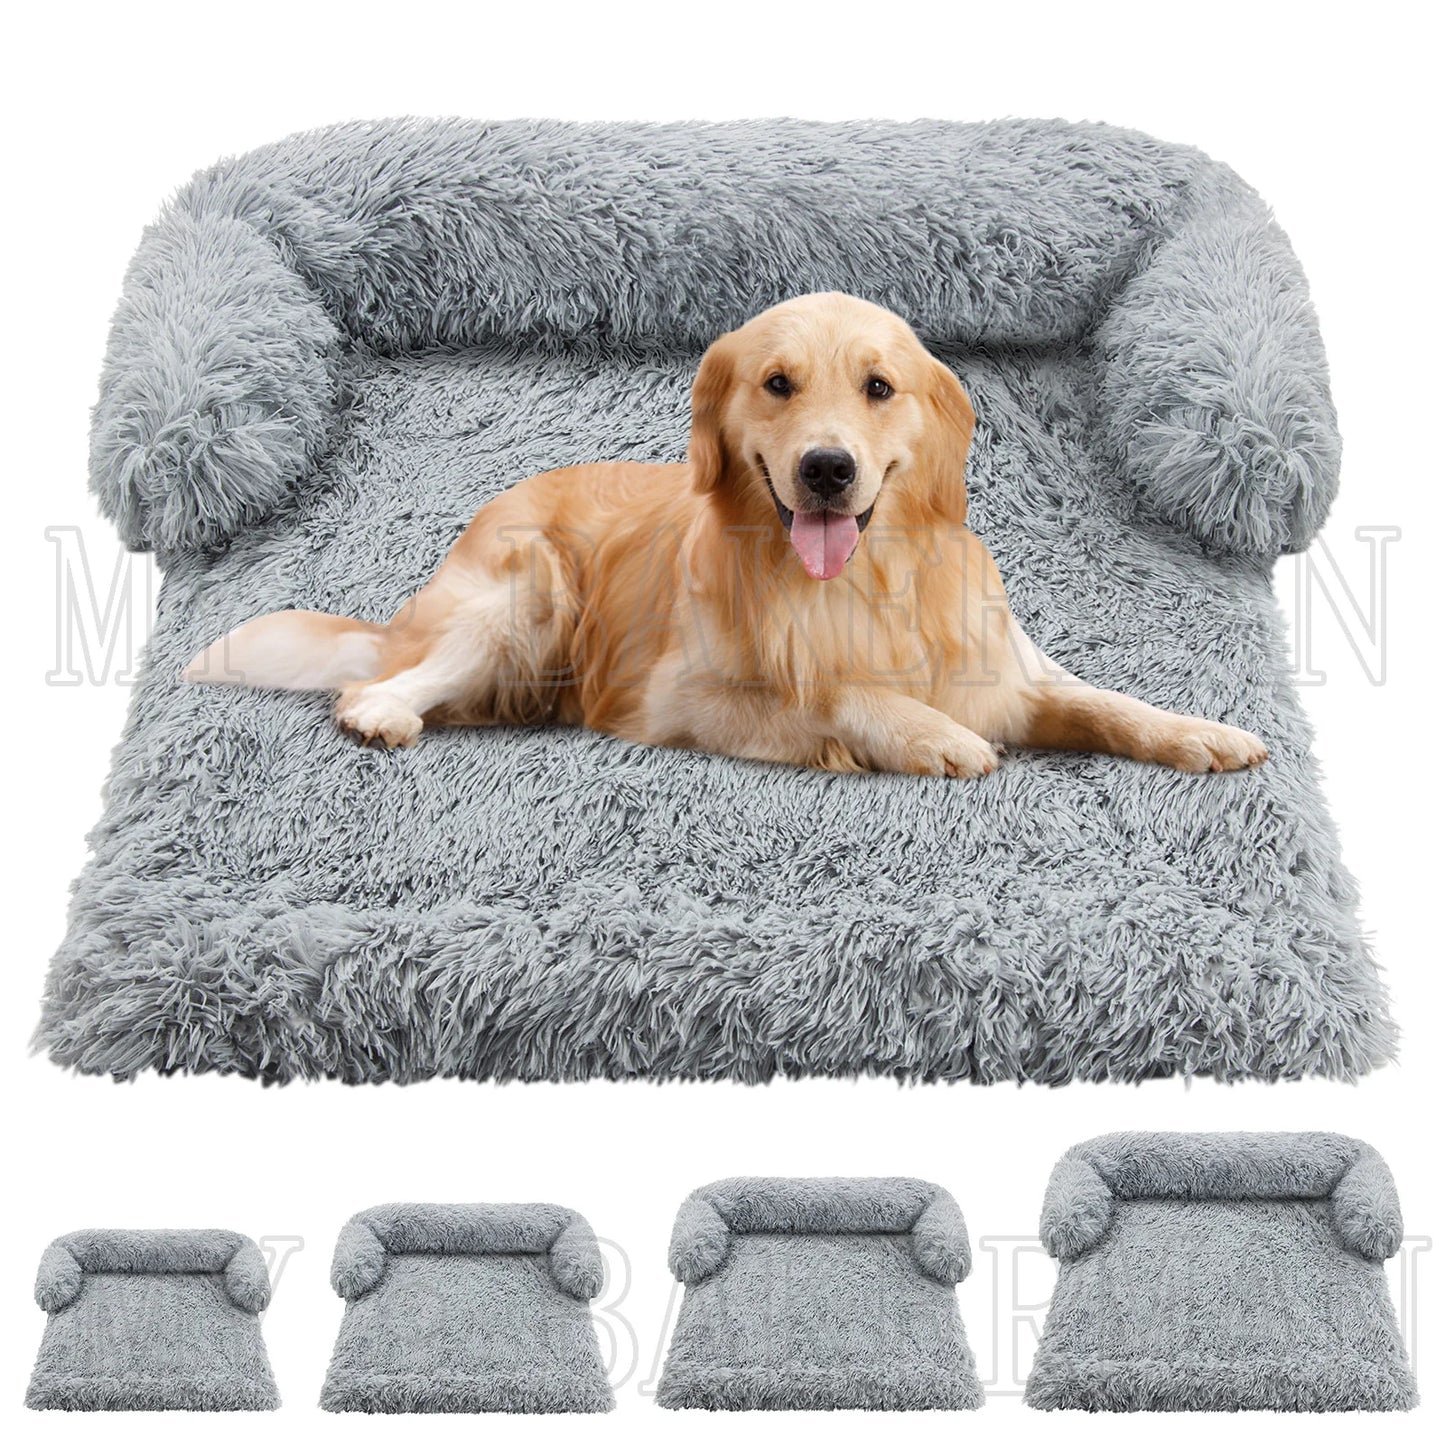 4 Styles With Removable Washable Cover And Waterproof Upholstered Sofa Pet Cat Dog Bed For All Seasons Plush 6size